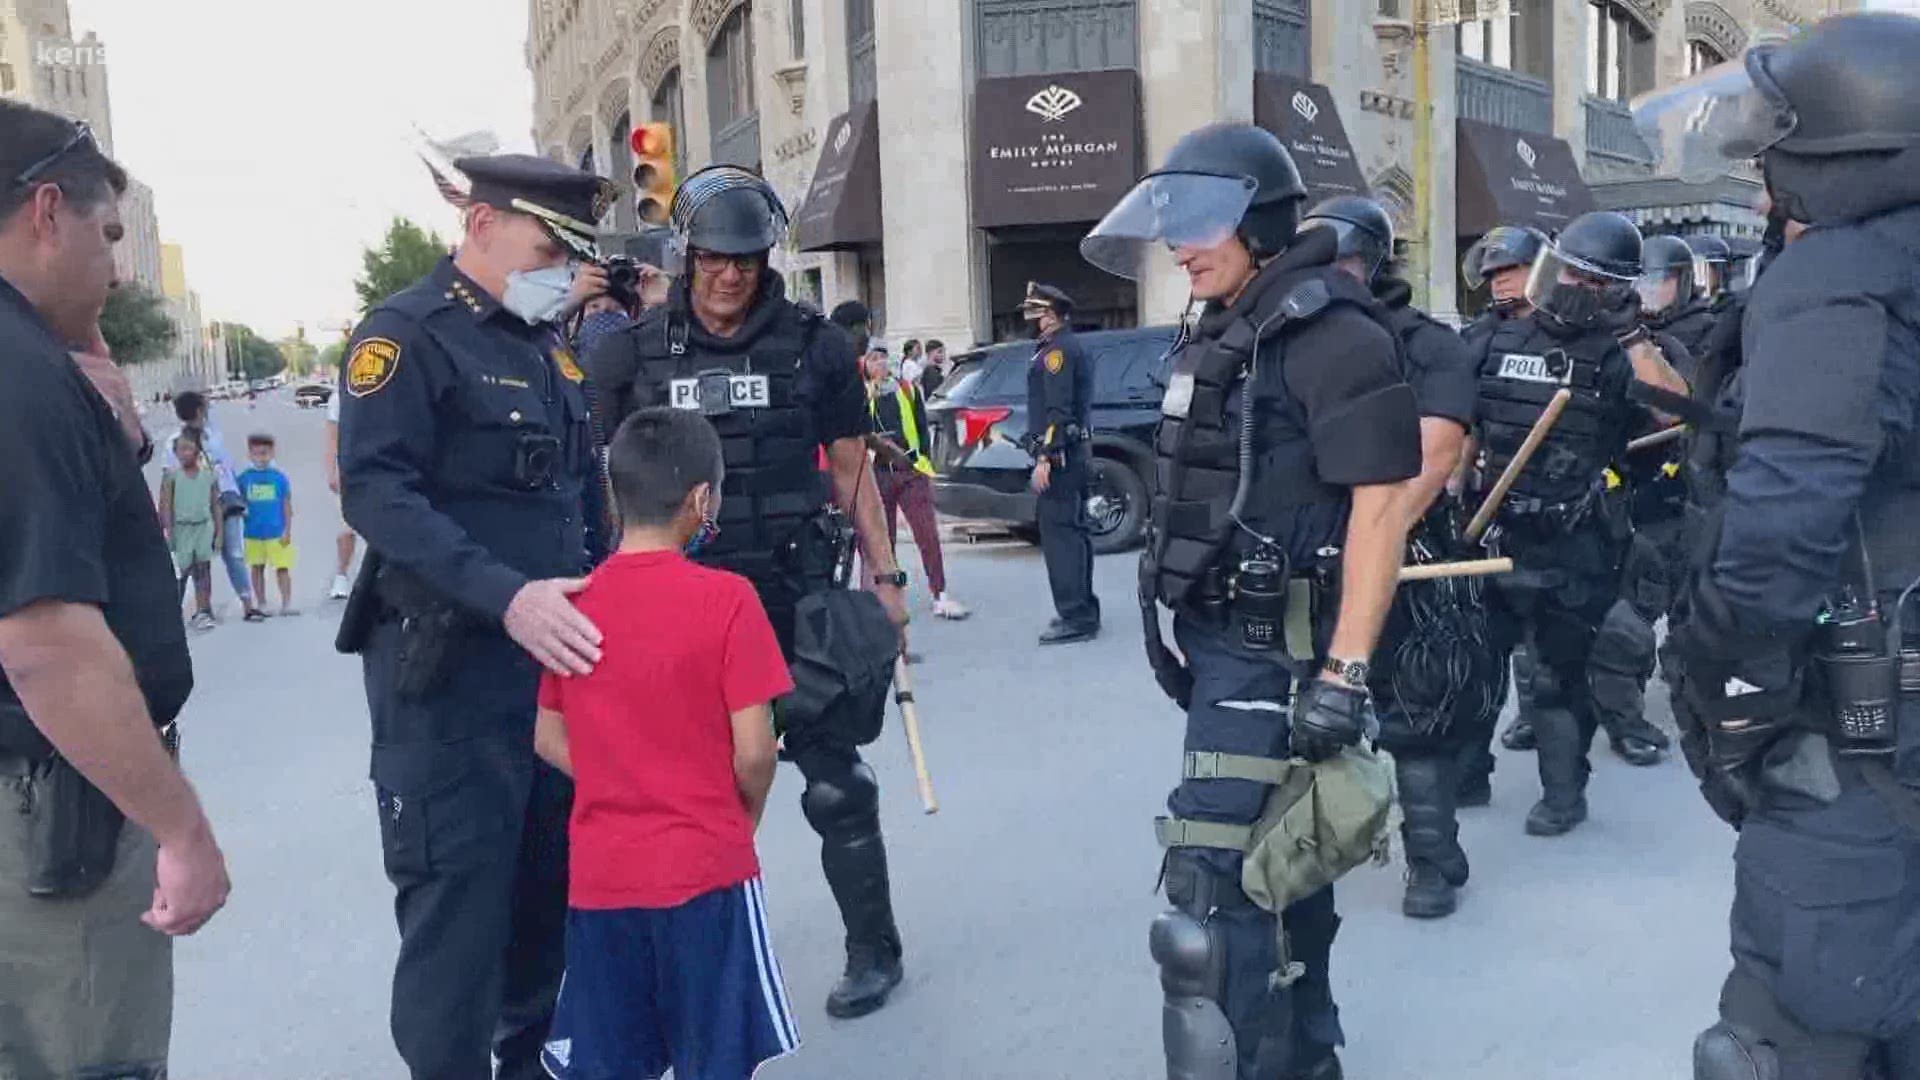 Watch this tender moment of San Antonio Police Chief William McManus helping a young boy who was scared of all the officers wearing riot gear near the Alamo.